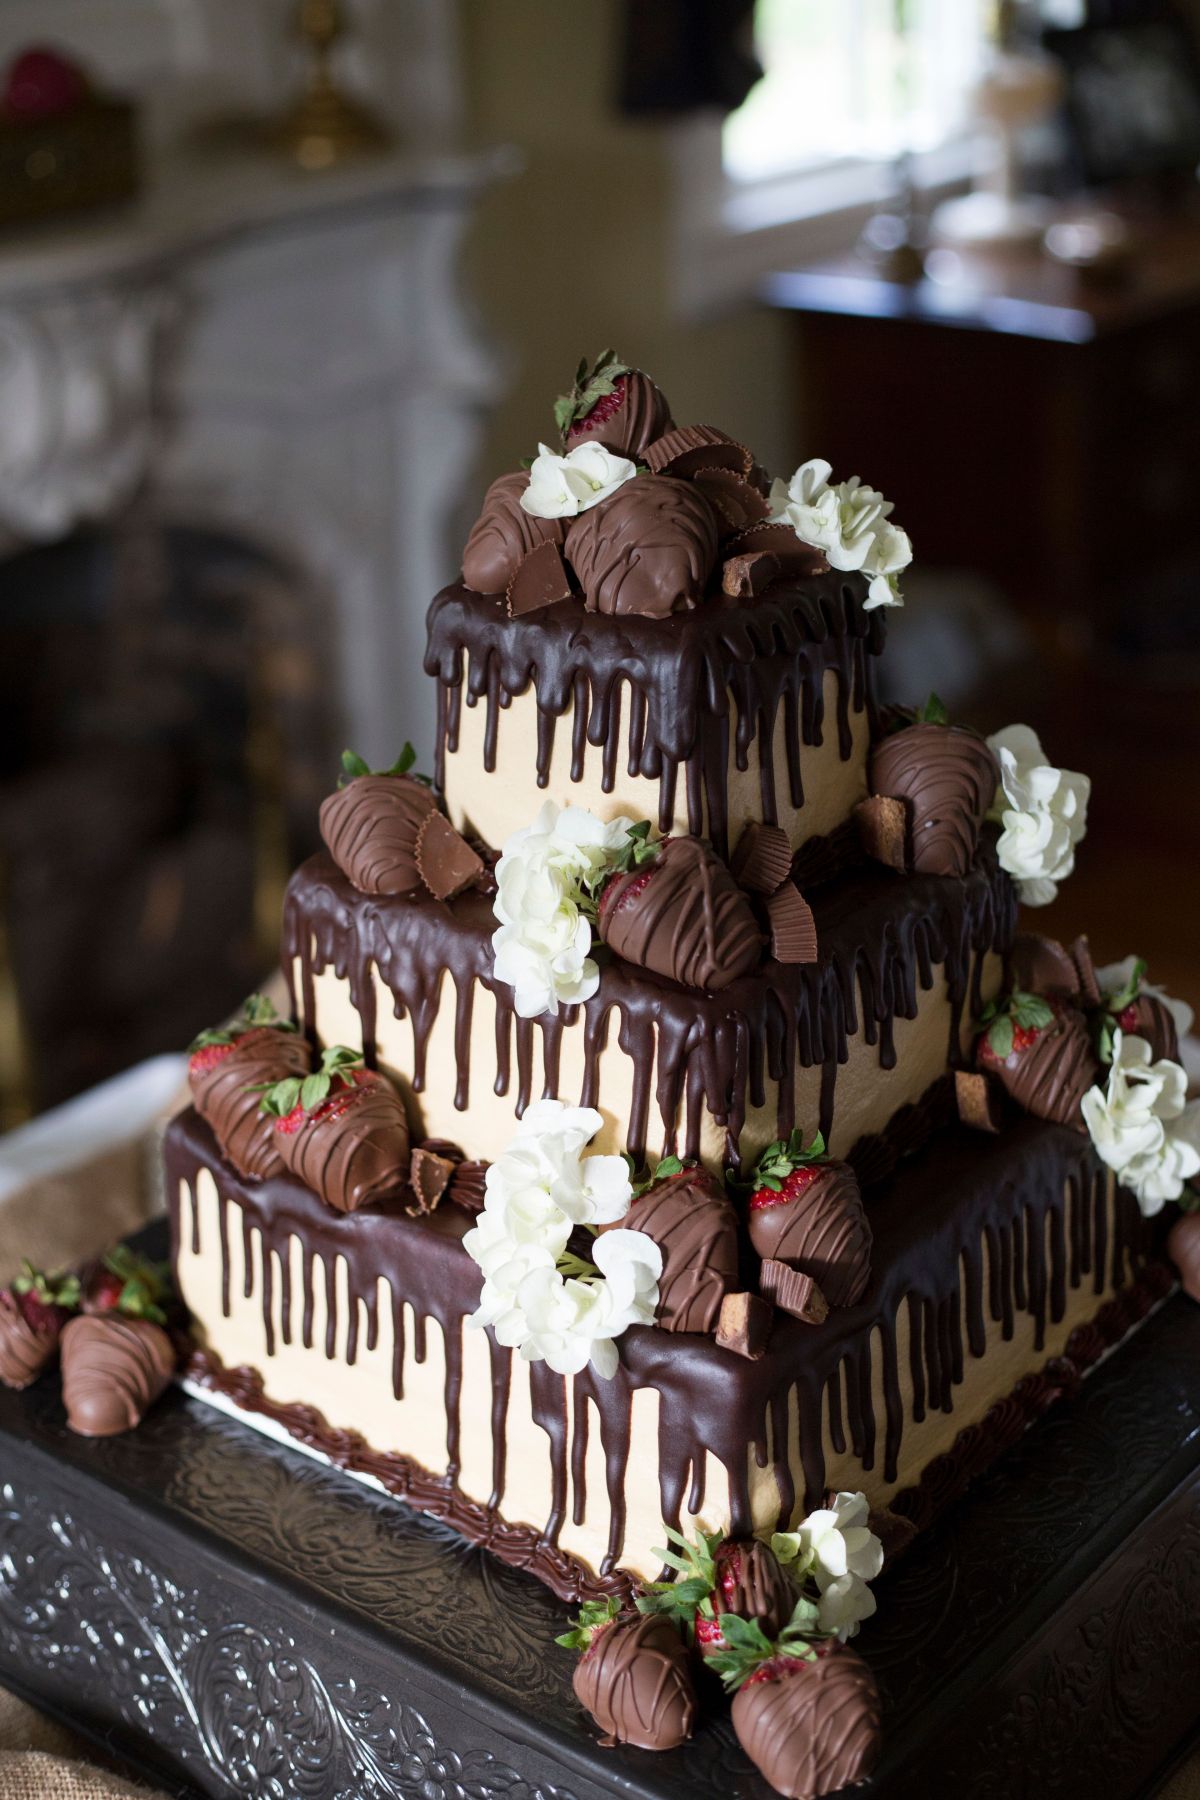 Tiered Chocolate Strawberry Covered Groom’s Cake